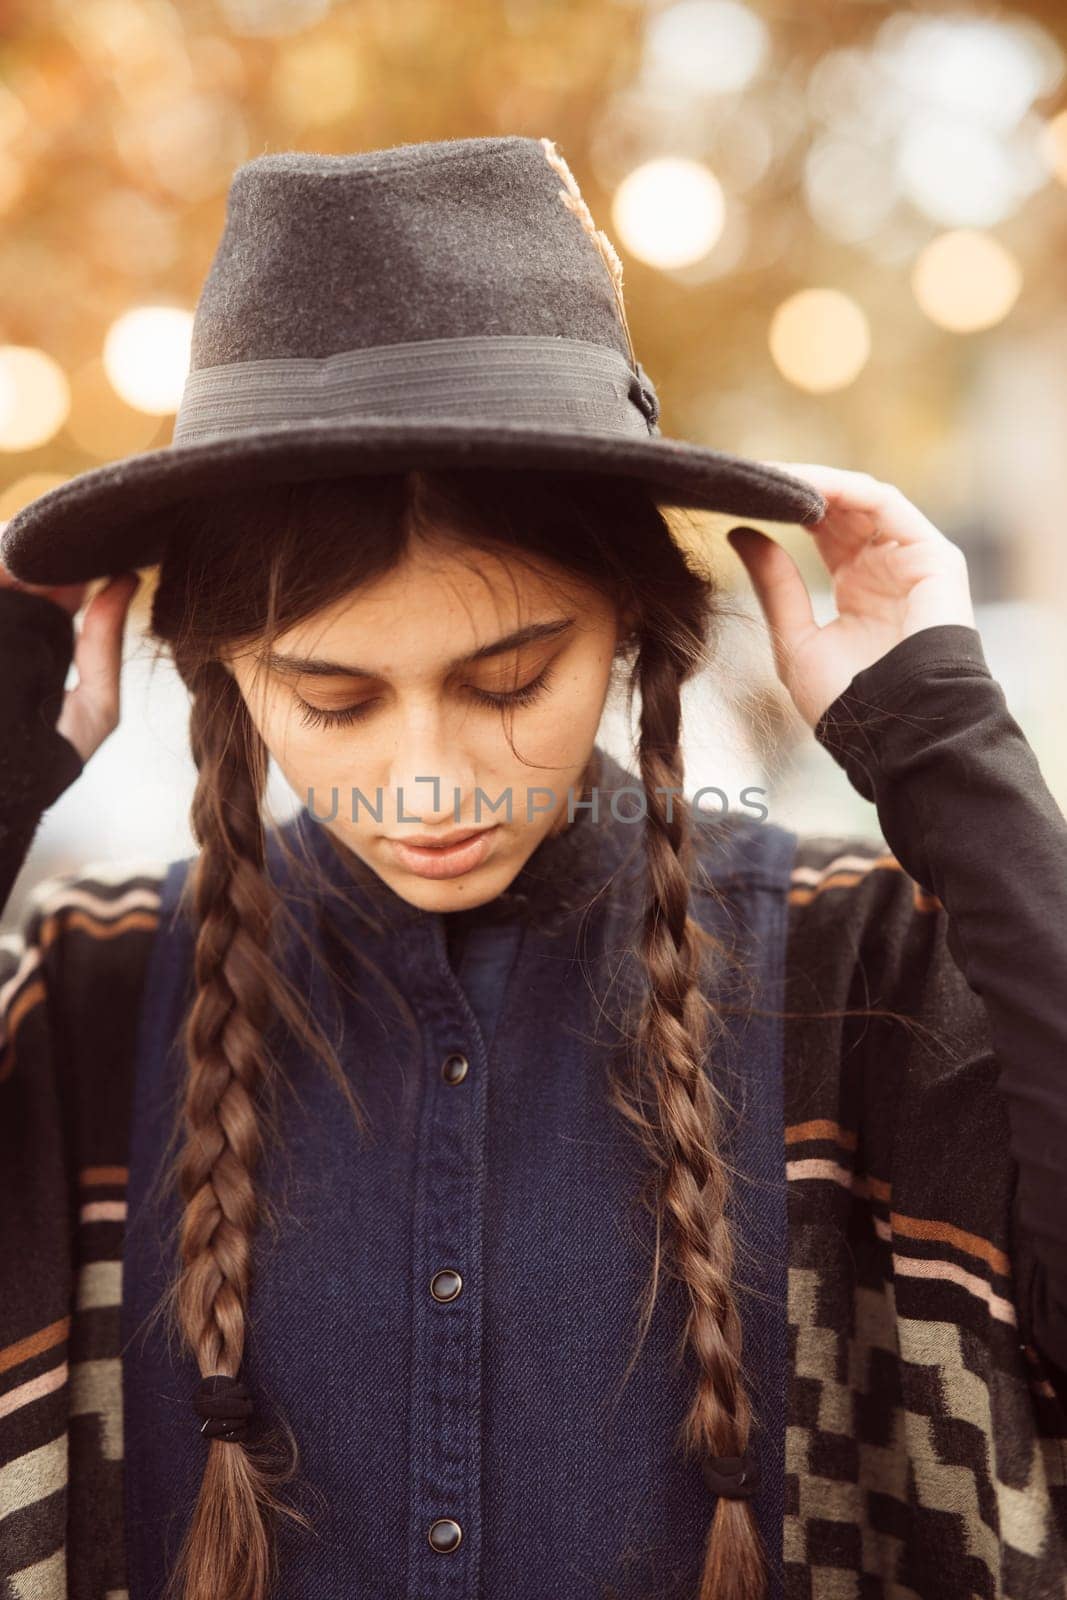 A graceful woman donning a black outfit and a fashionable hat. High quality photo